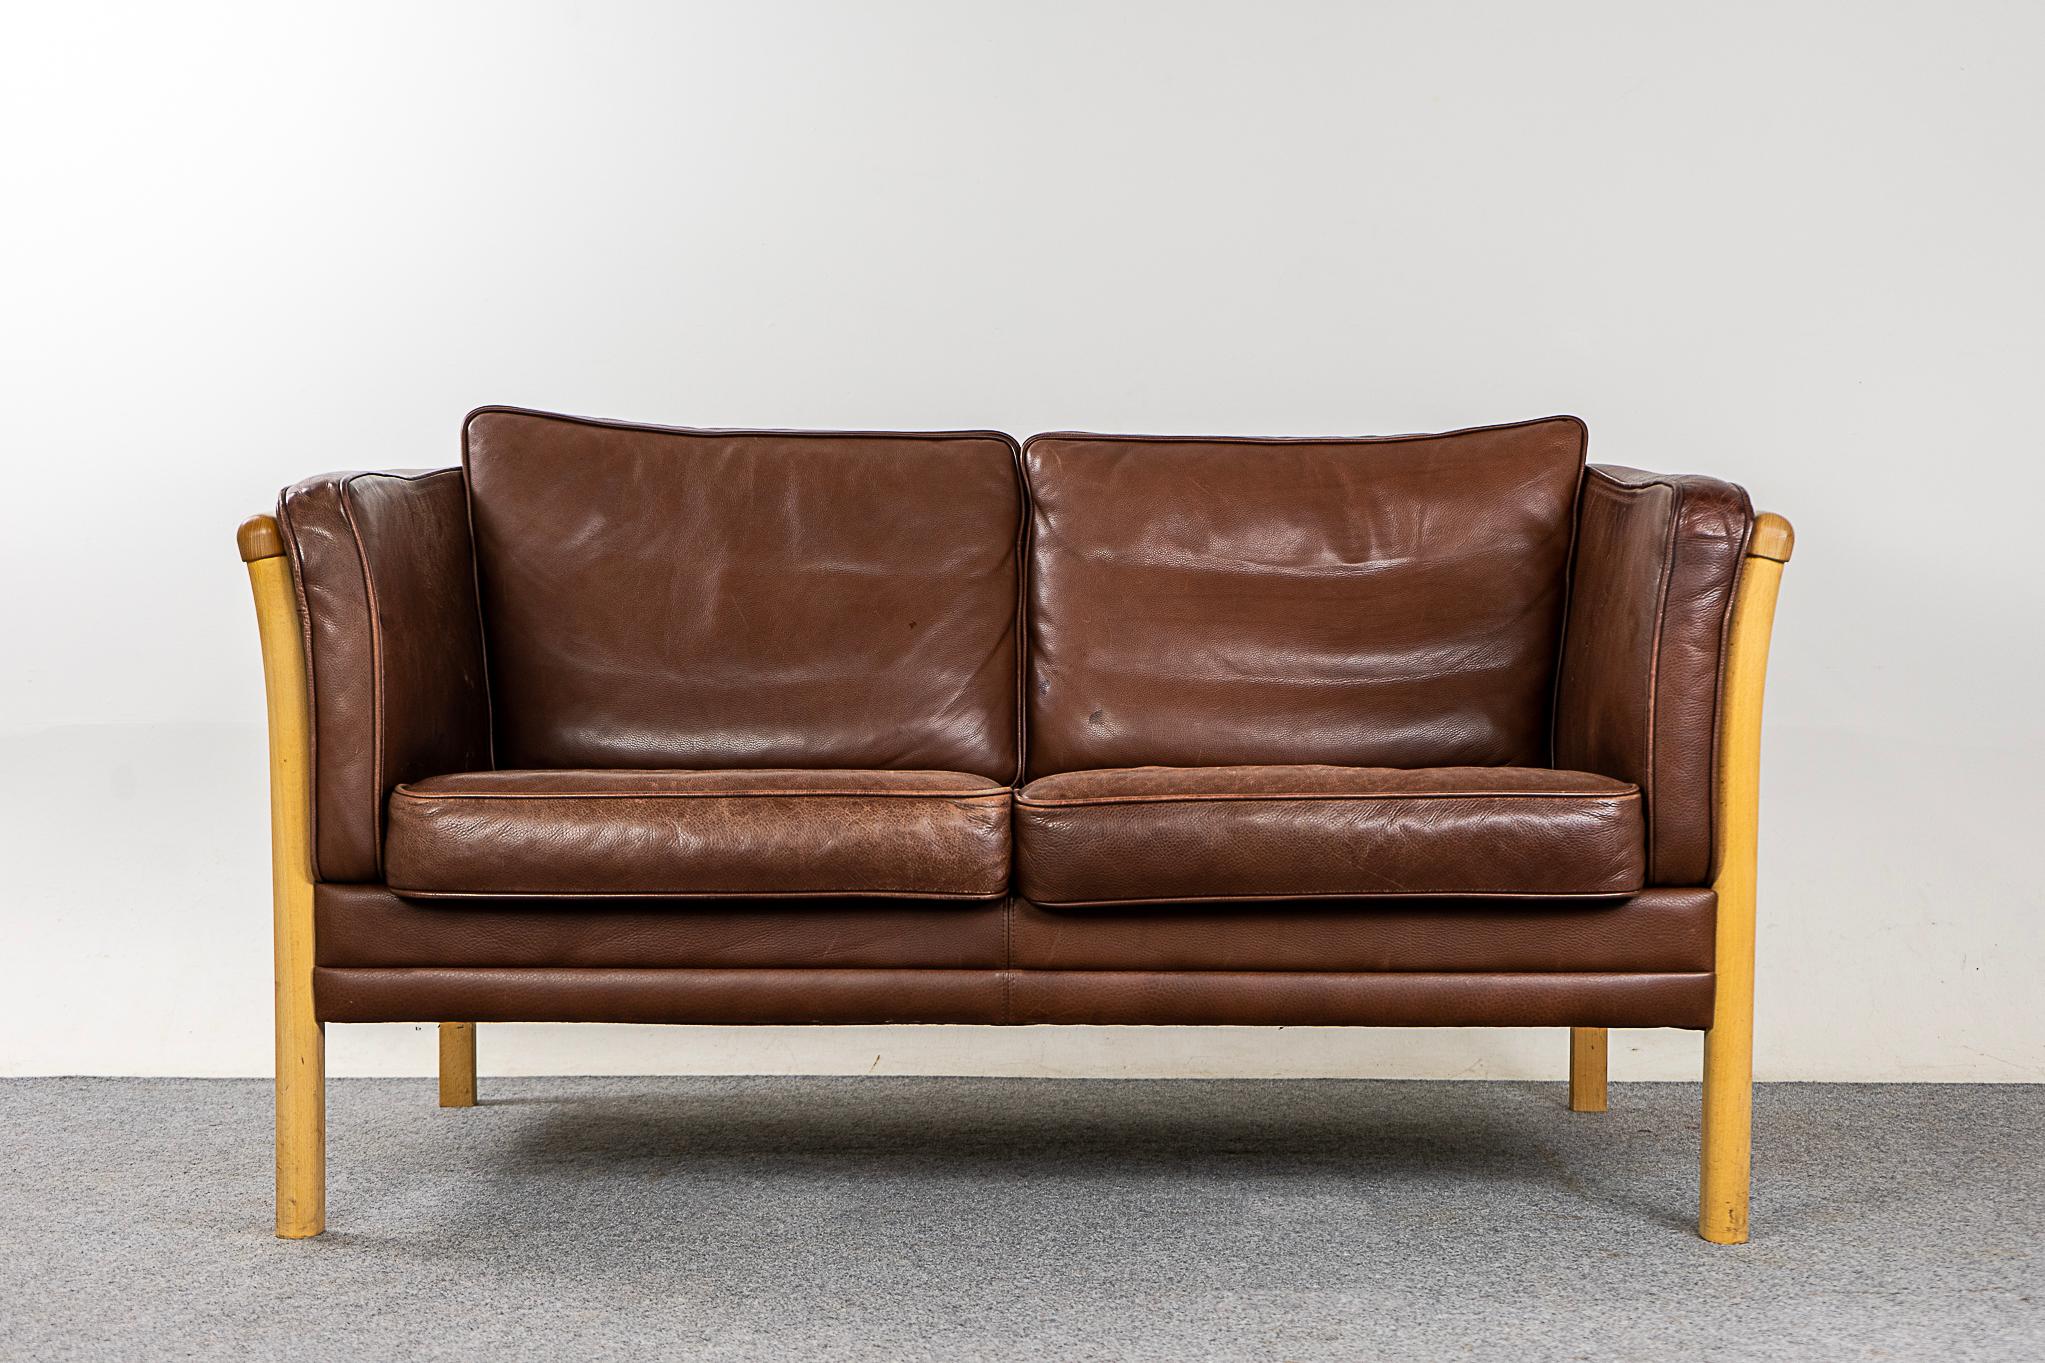 Beech & leather loveseat, circa 1960's. Soft and supple, yet durable enough to ensure years of enjoyment. Solid beech wood frame with stylish slats and removable cushions. Spend the evening in!

Please inquire for international shipping rates.